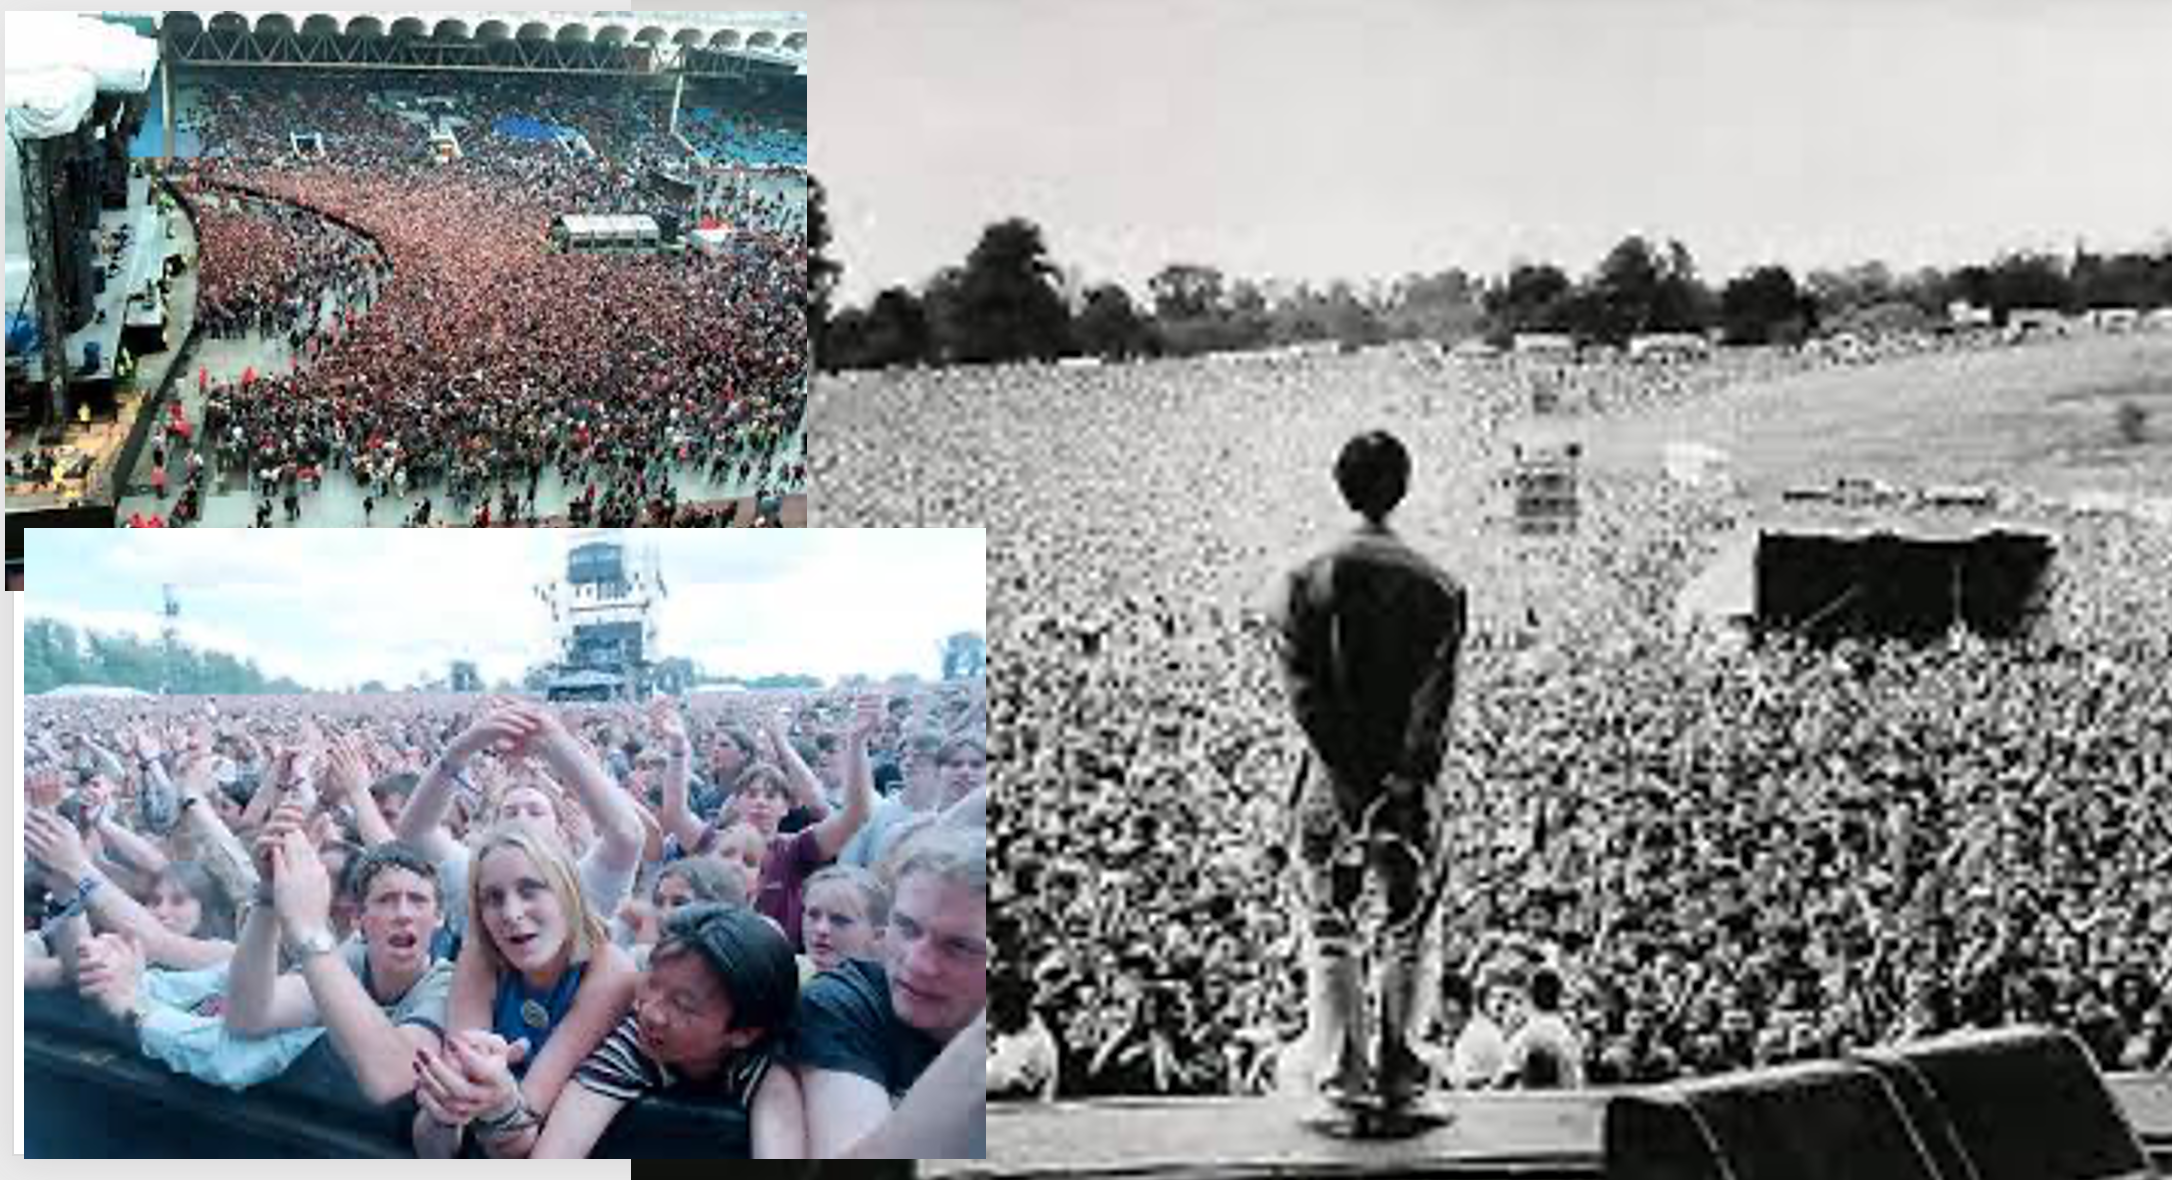 Above: A slide David used to show crowd adoration at Oasis’ concerts.